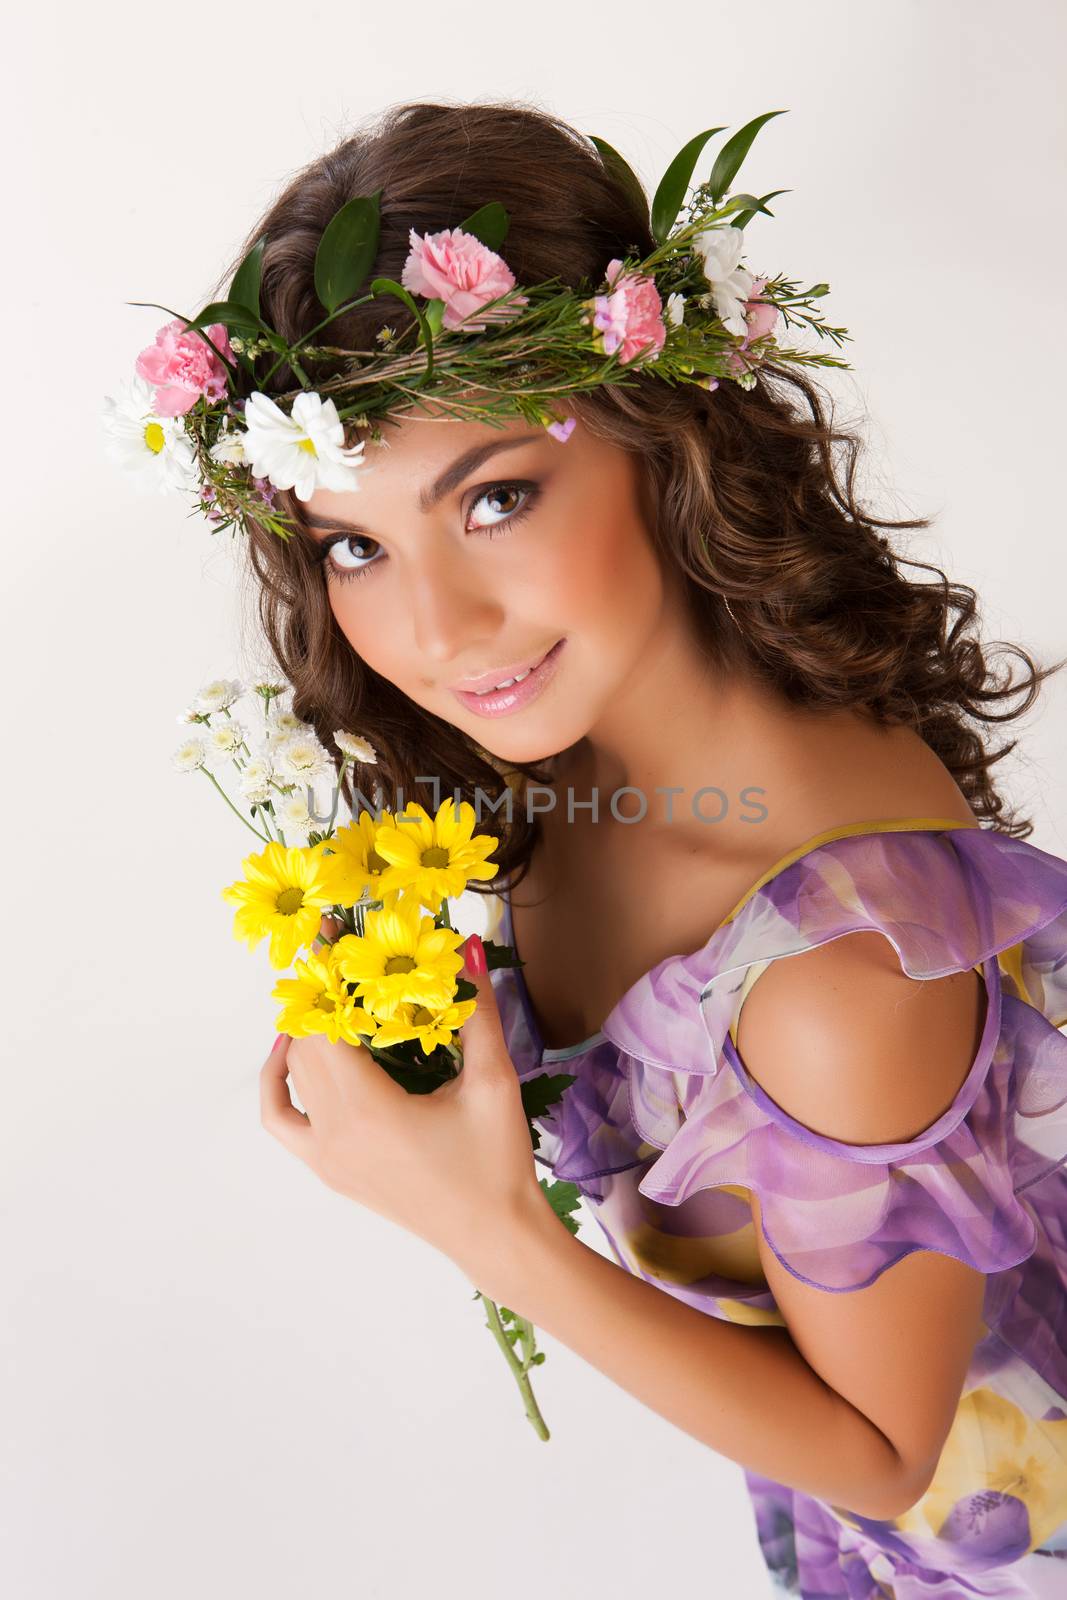 Young Woman With Flower Garland by Fotoskat